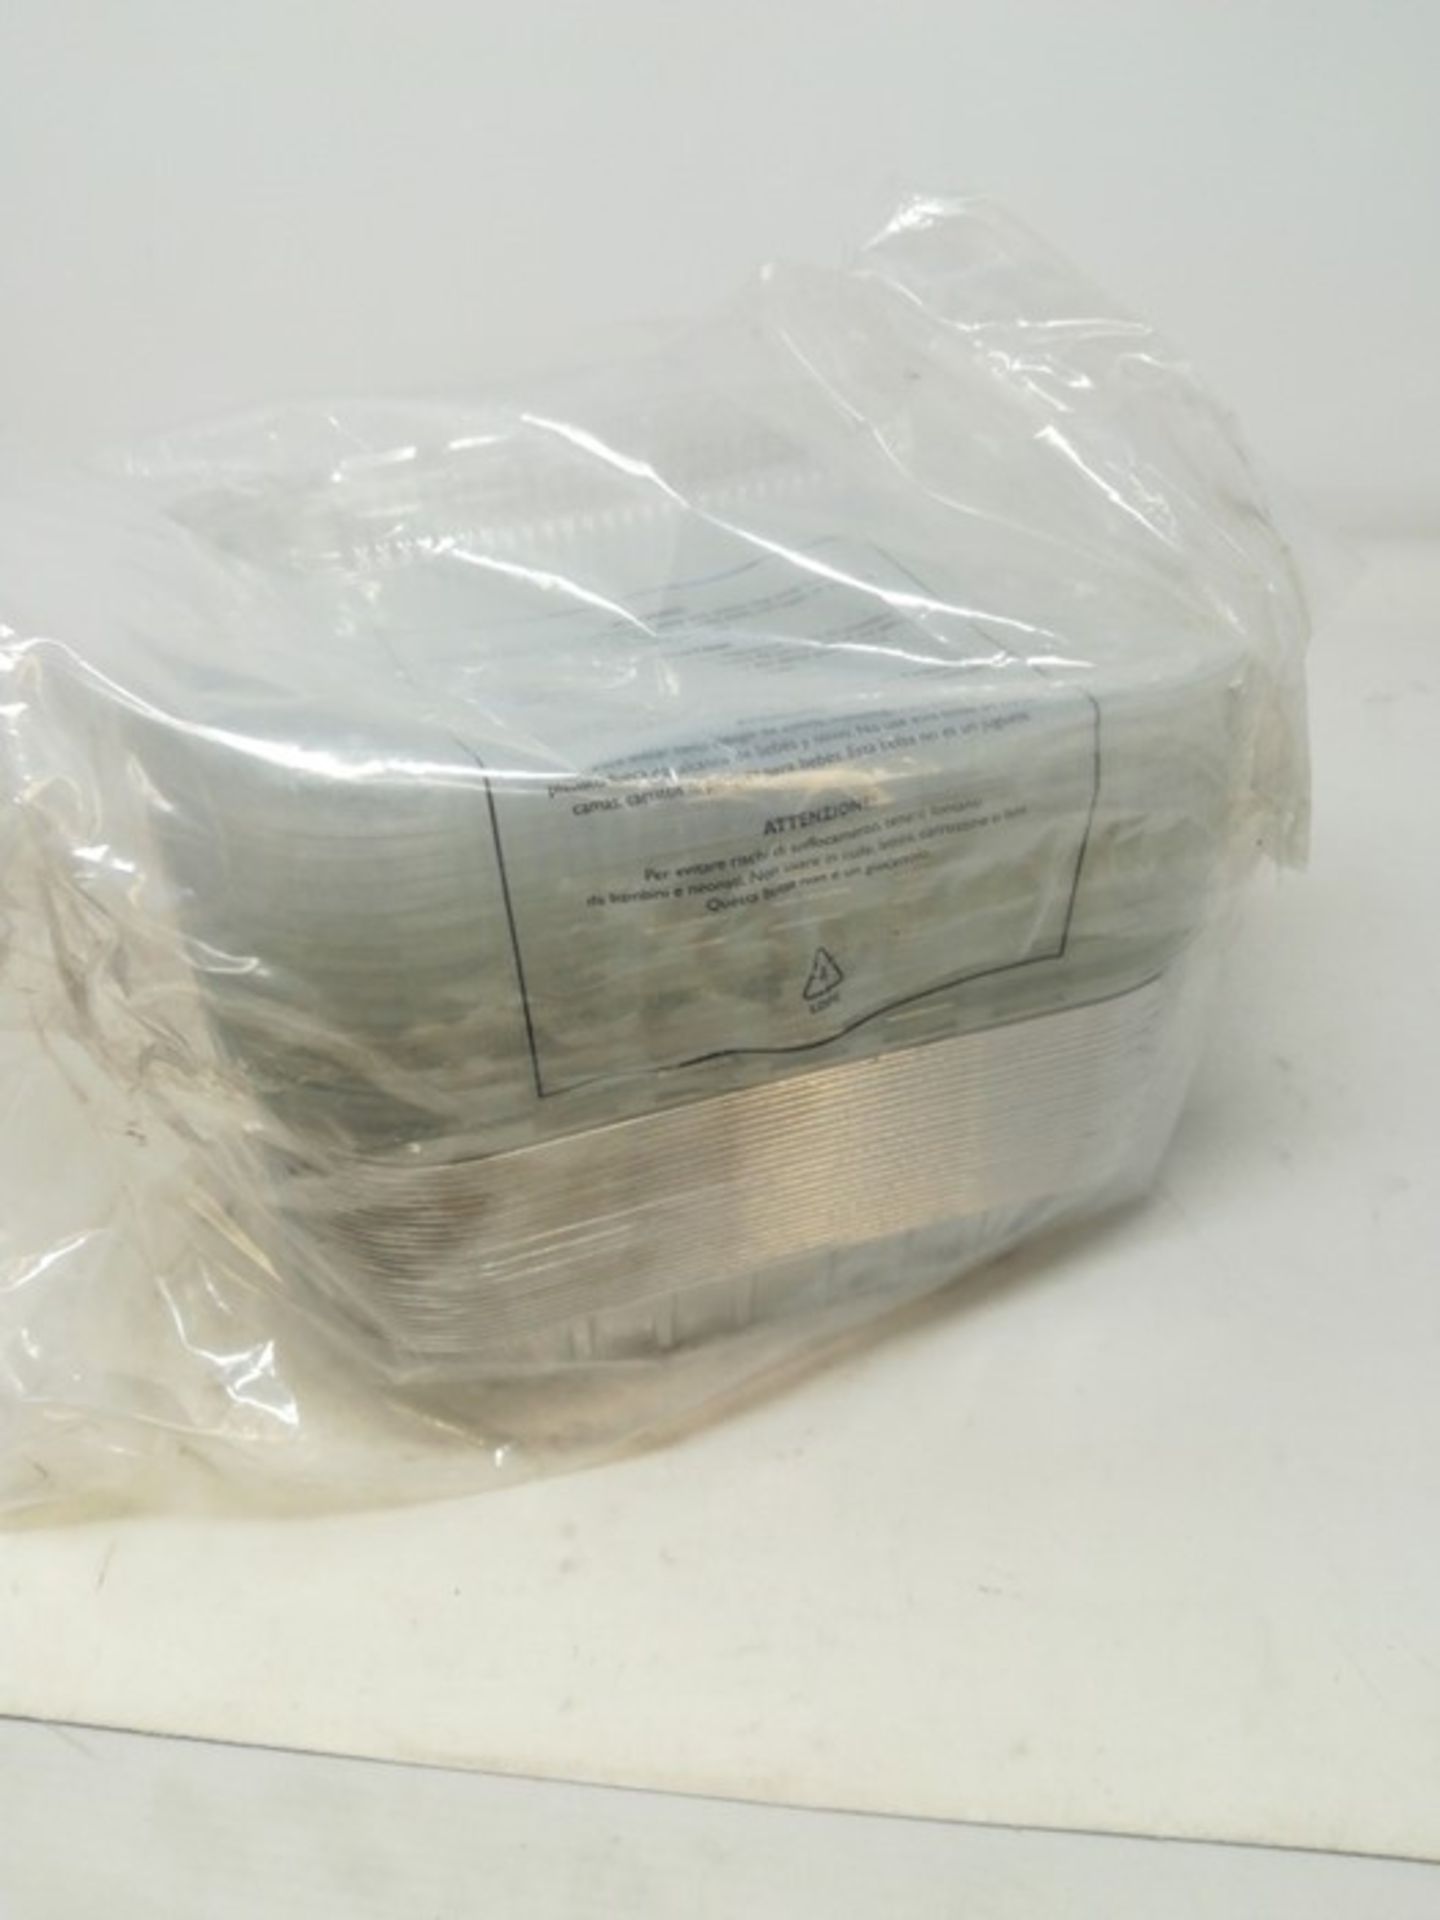 Bakery direct-25 Aluminium- Foil- Strong Disposable Baking Tray Loaf Dish Complete wit - Image 2 of 2